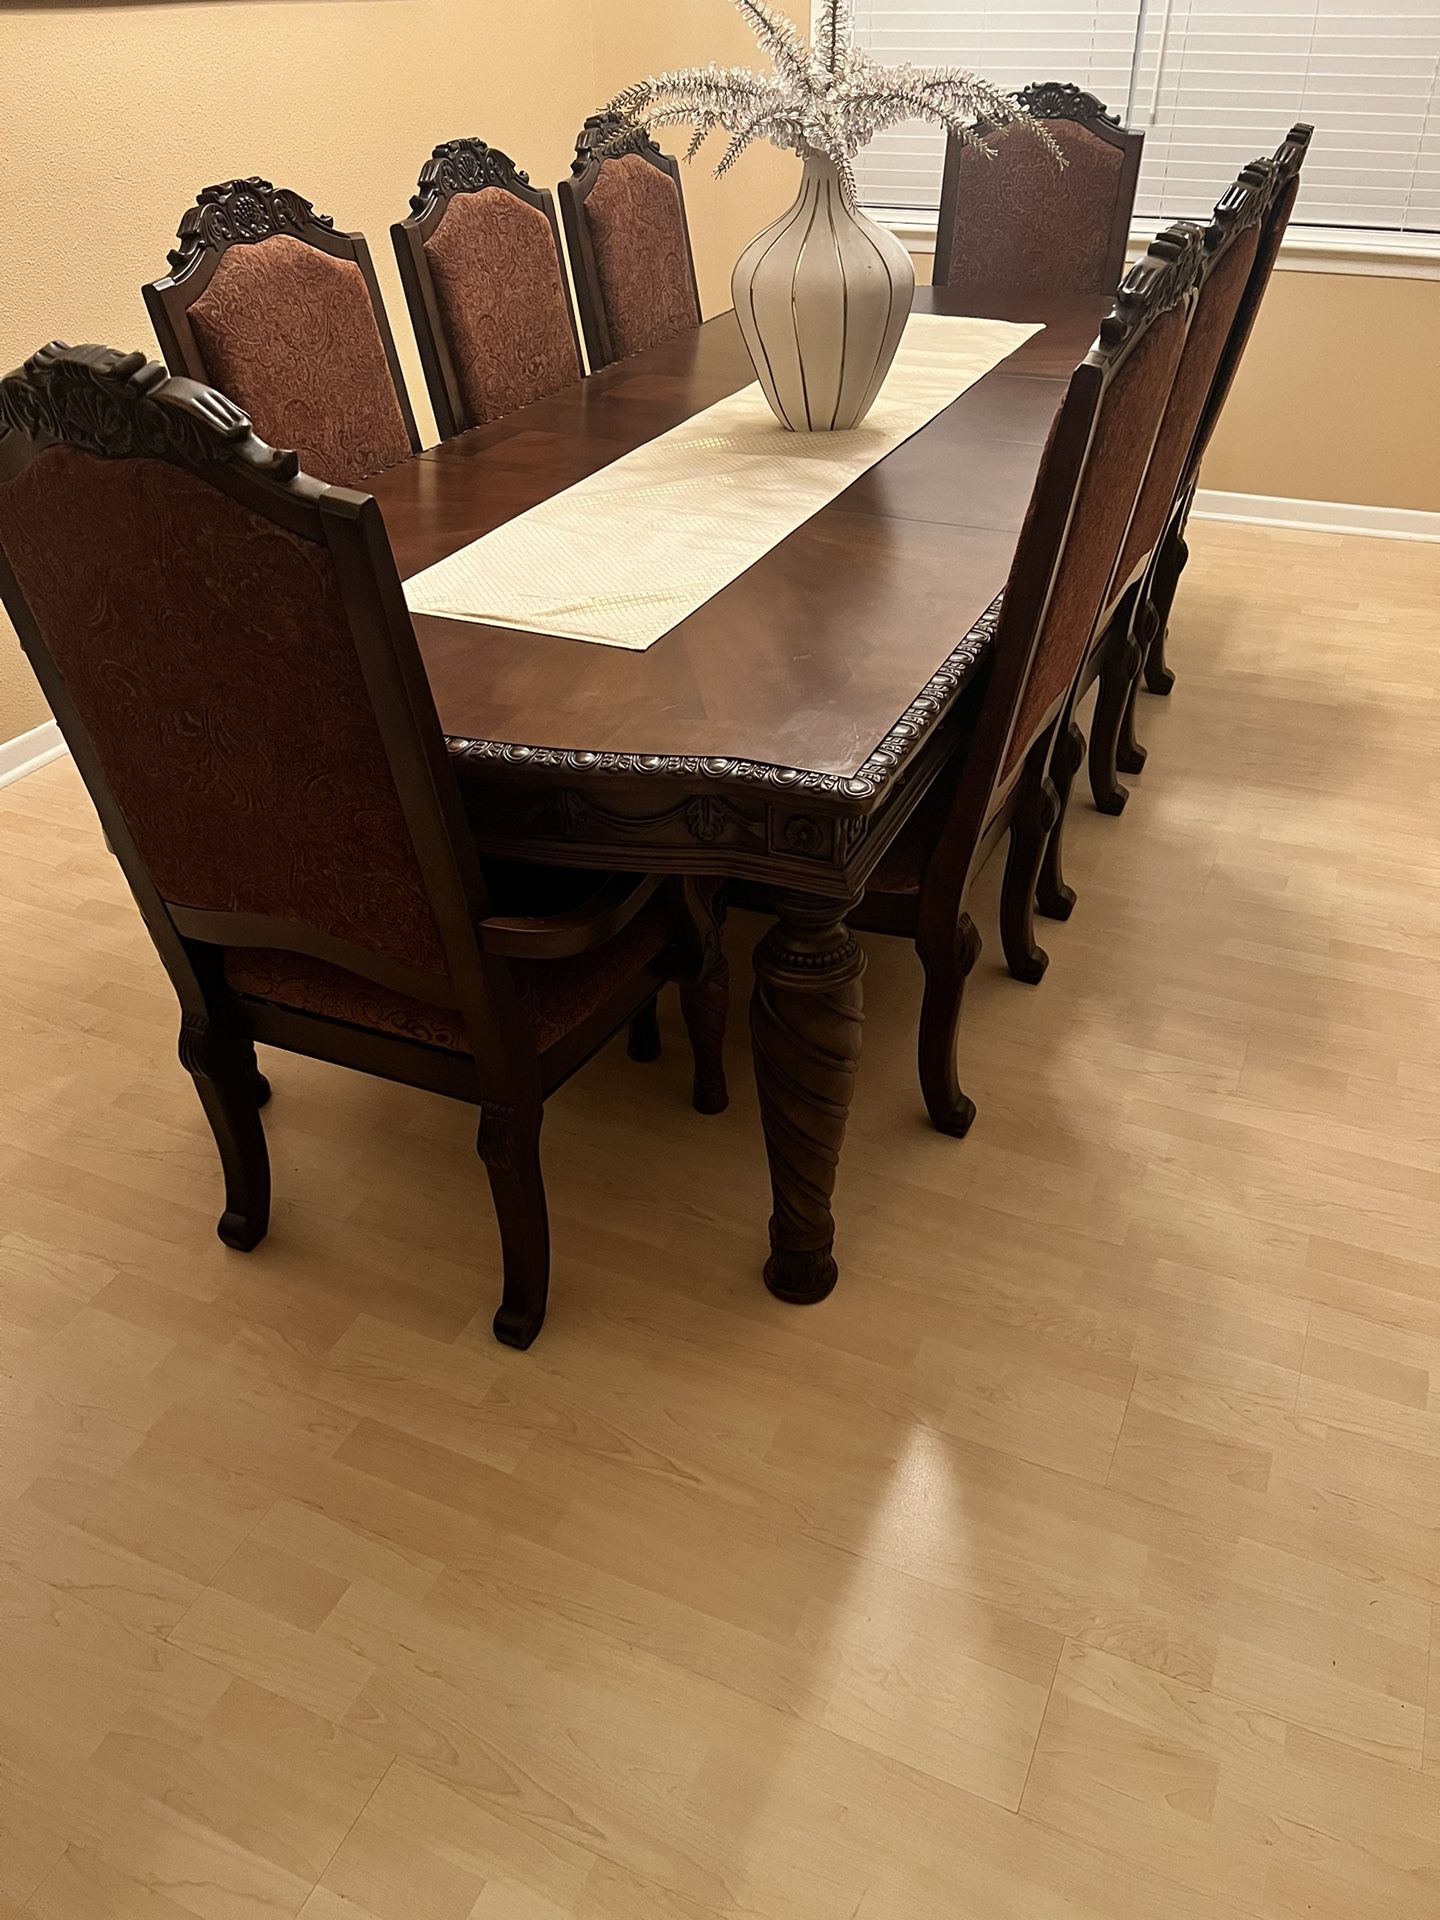 Northshore 8 Piece Dining Room Table